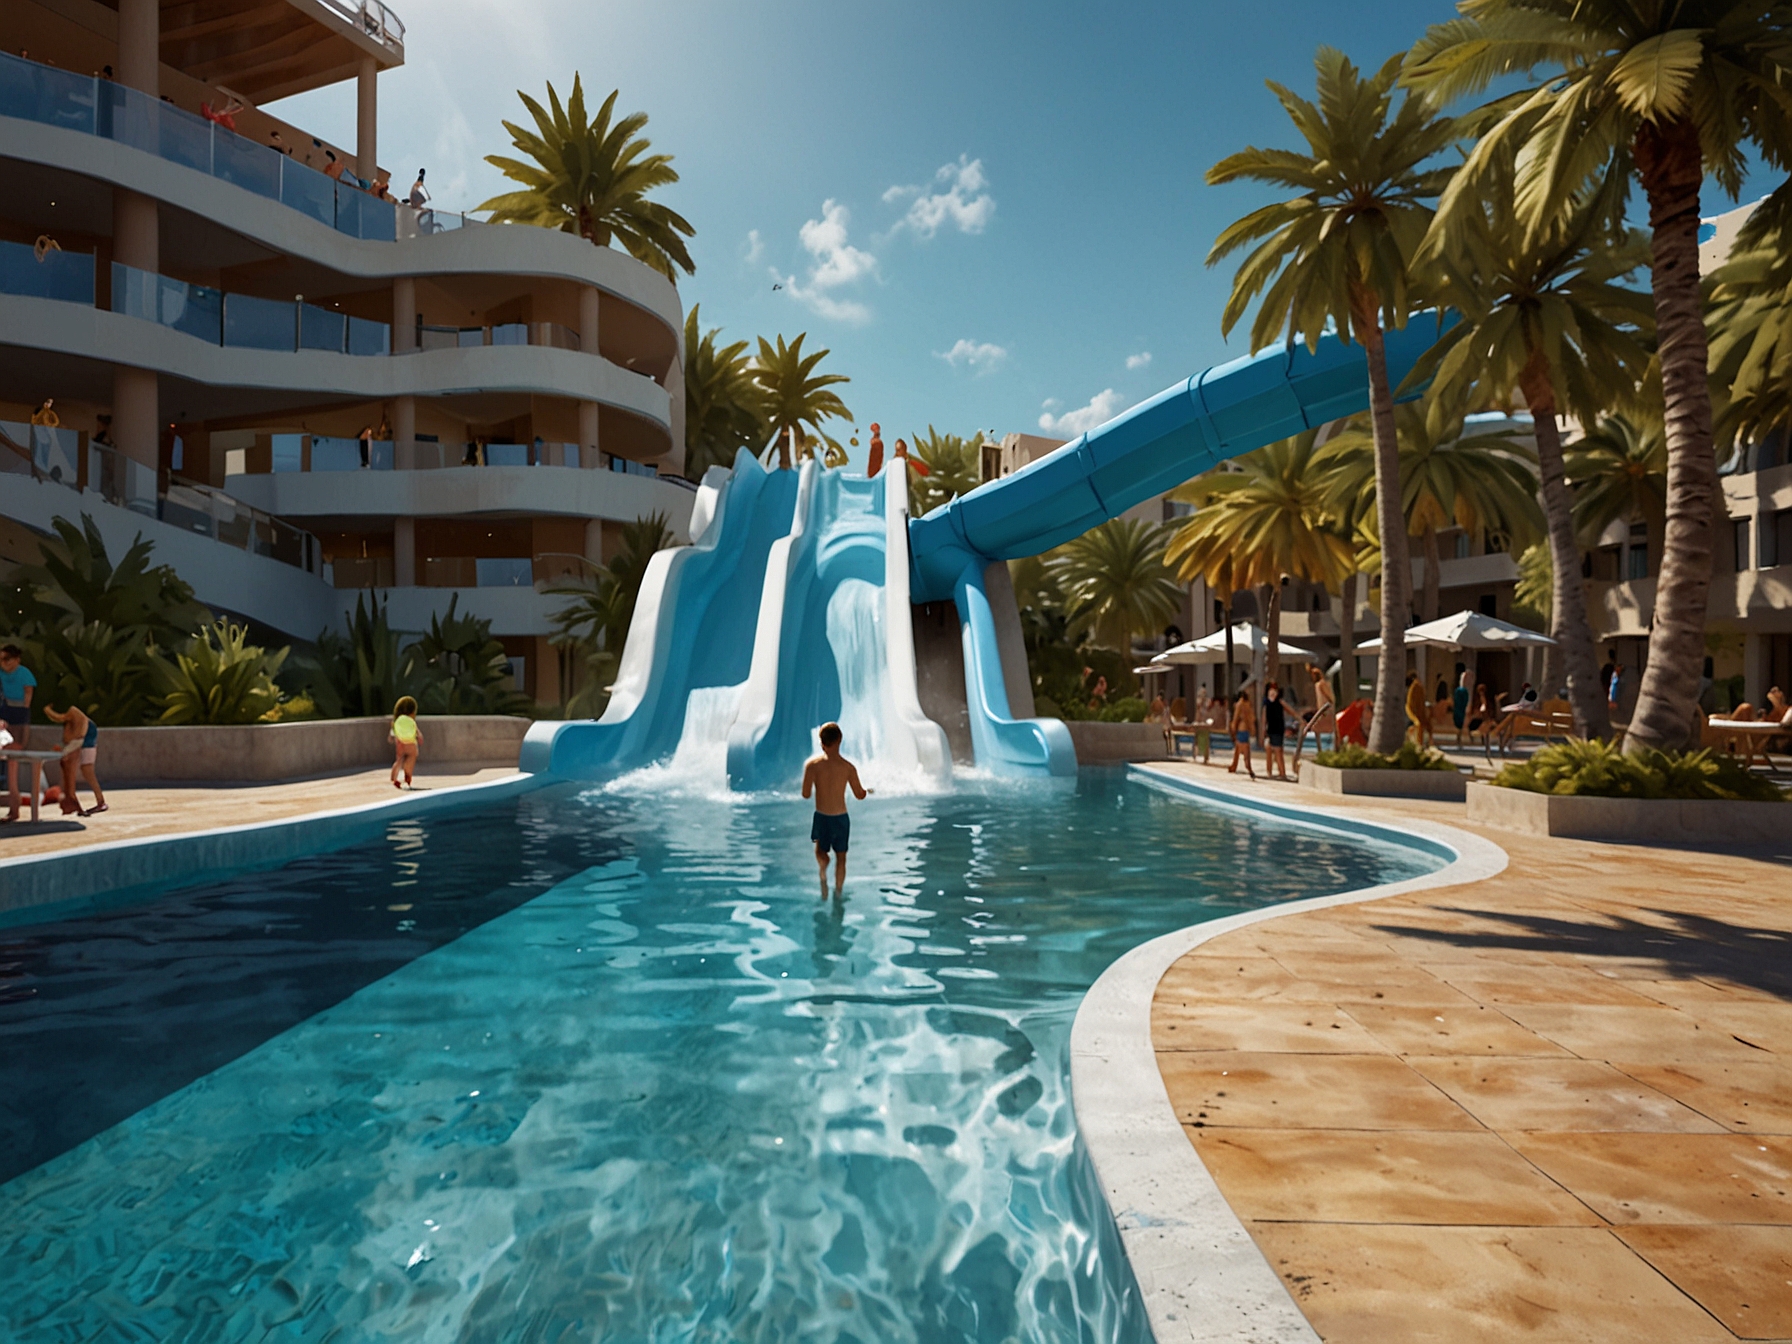 A thrilling water slide at Majorca's largest waterpark hotel, with kids laughing and splashing as they zoom down into the crystal clear pool below.